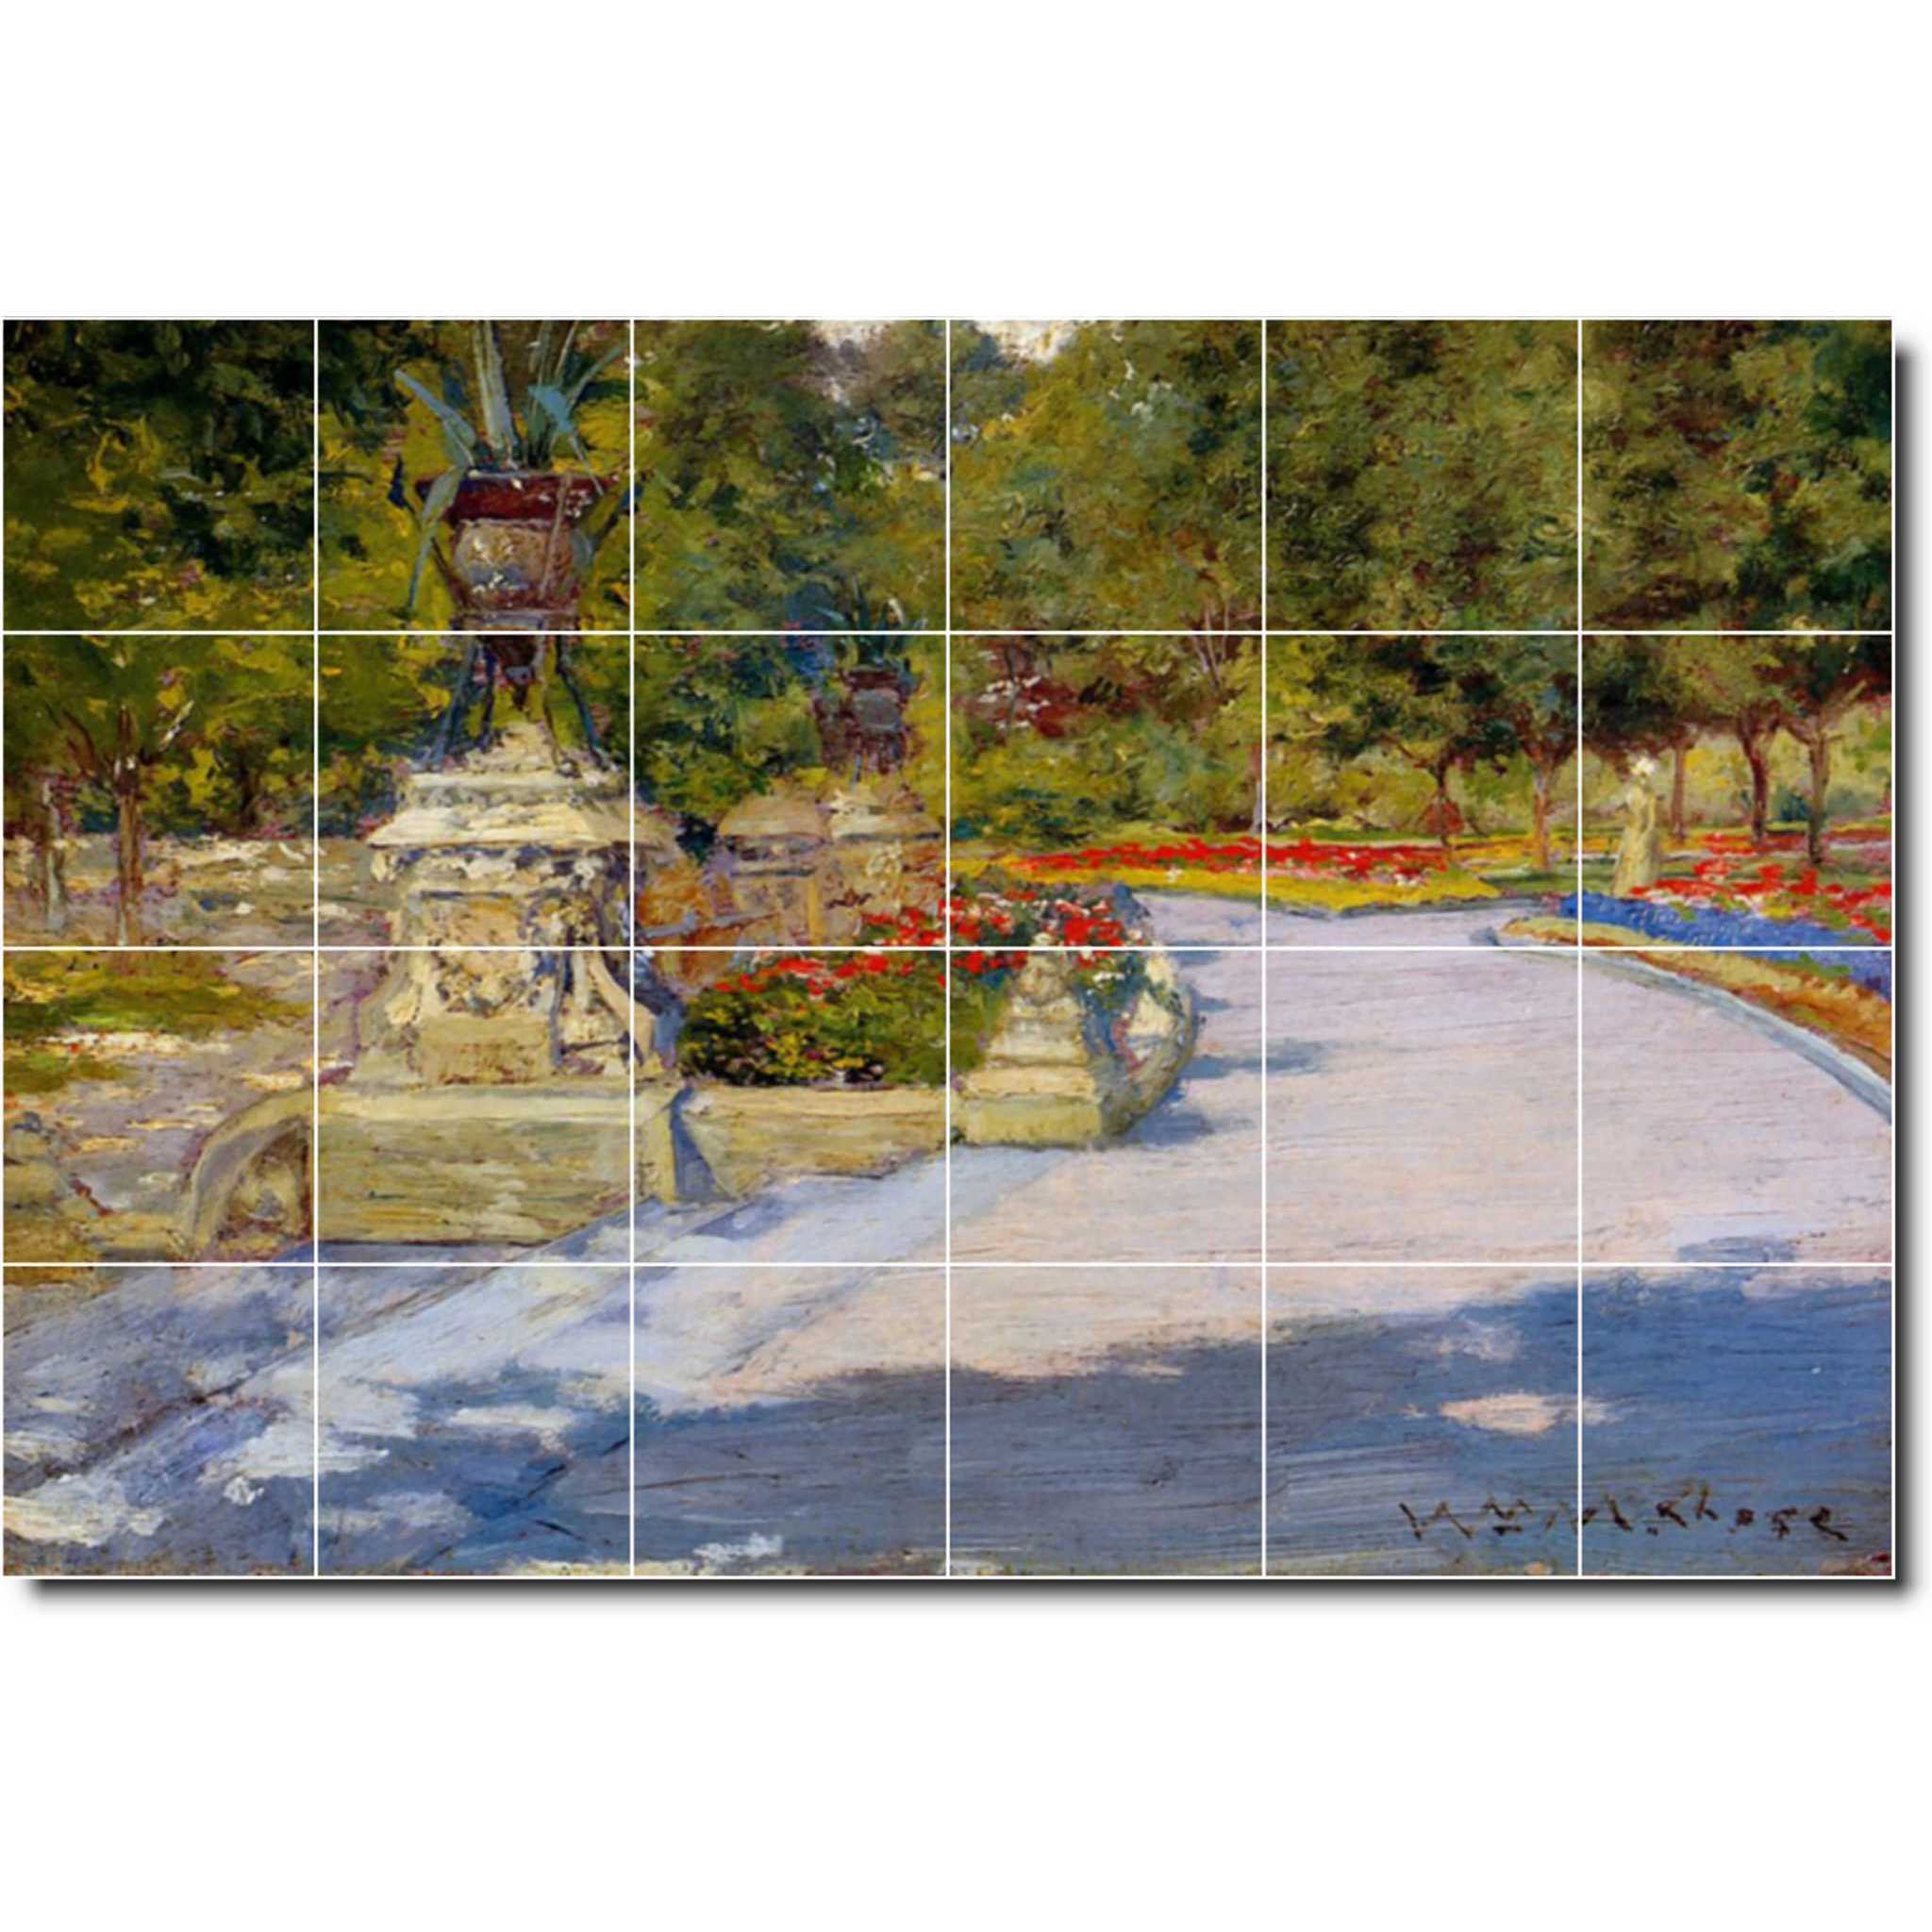 william chase country painting ceramic tile mural p01609